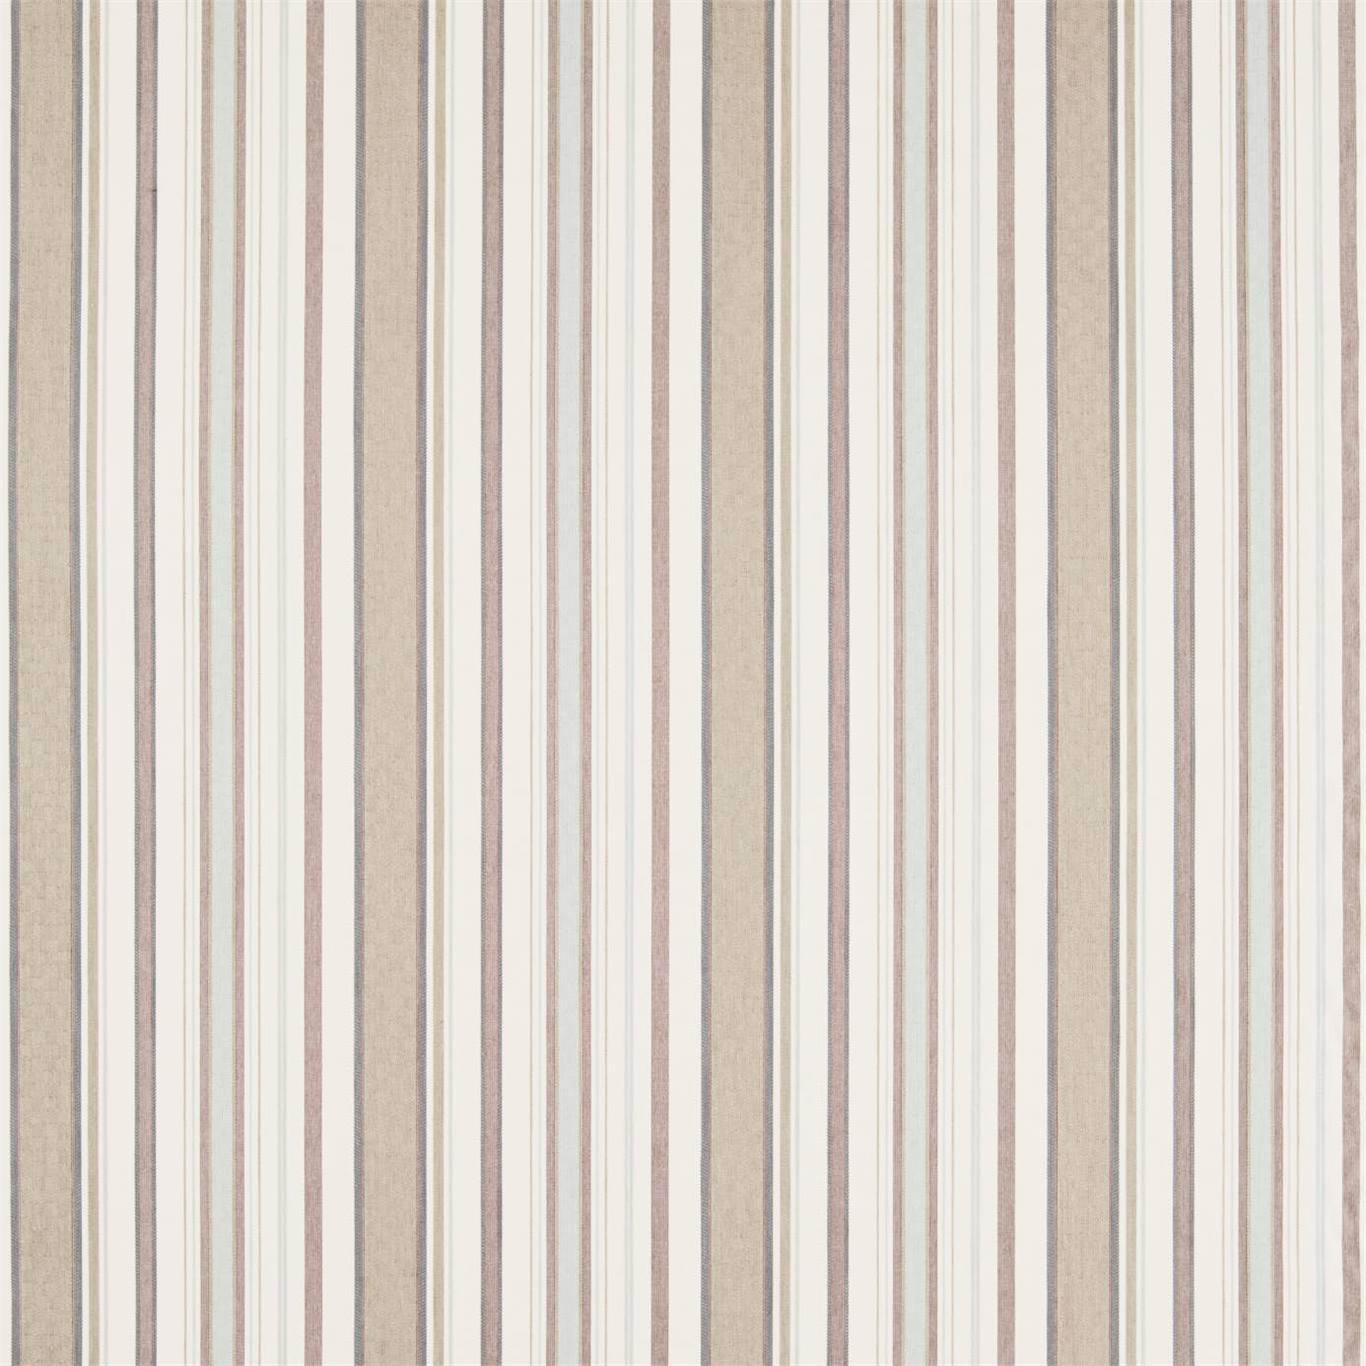 Dobby Stripe Mineral Fabric by SAN